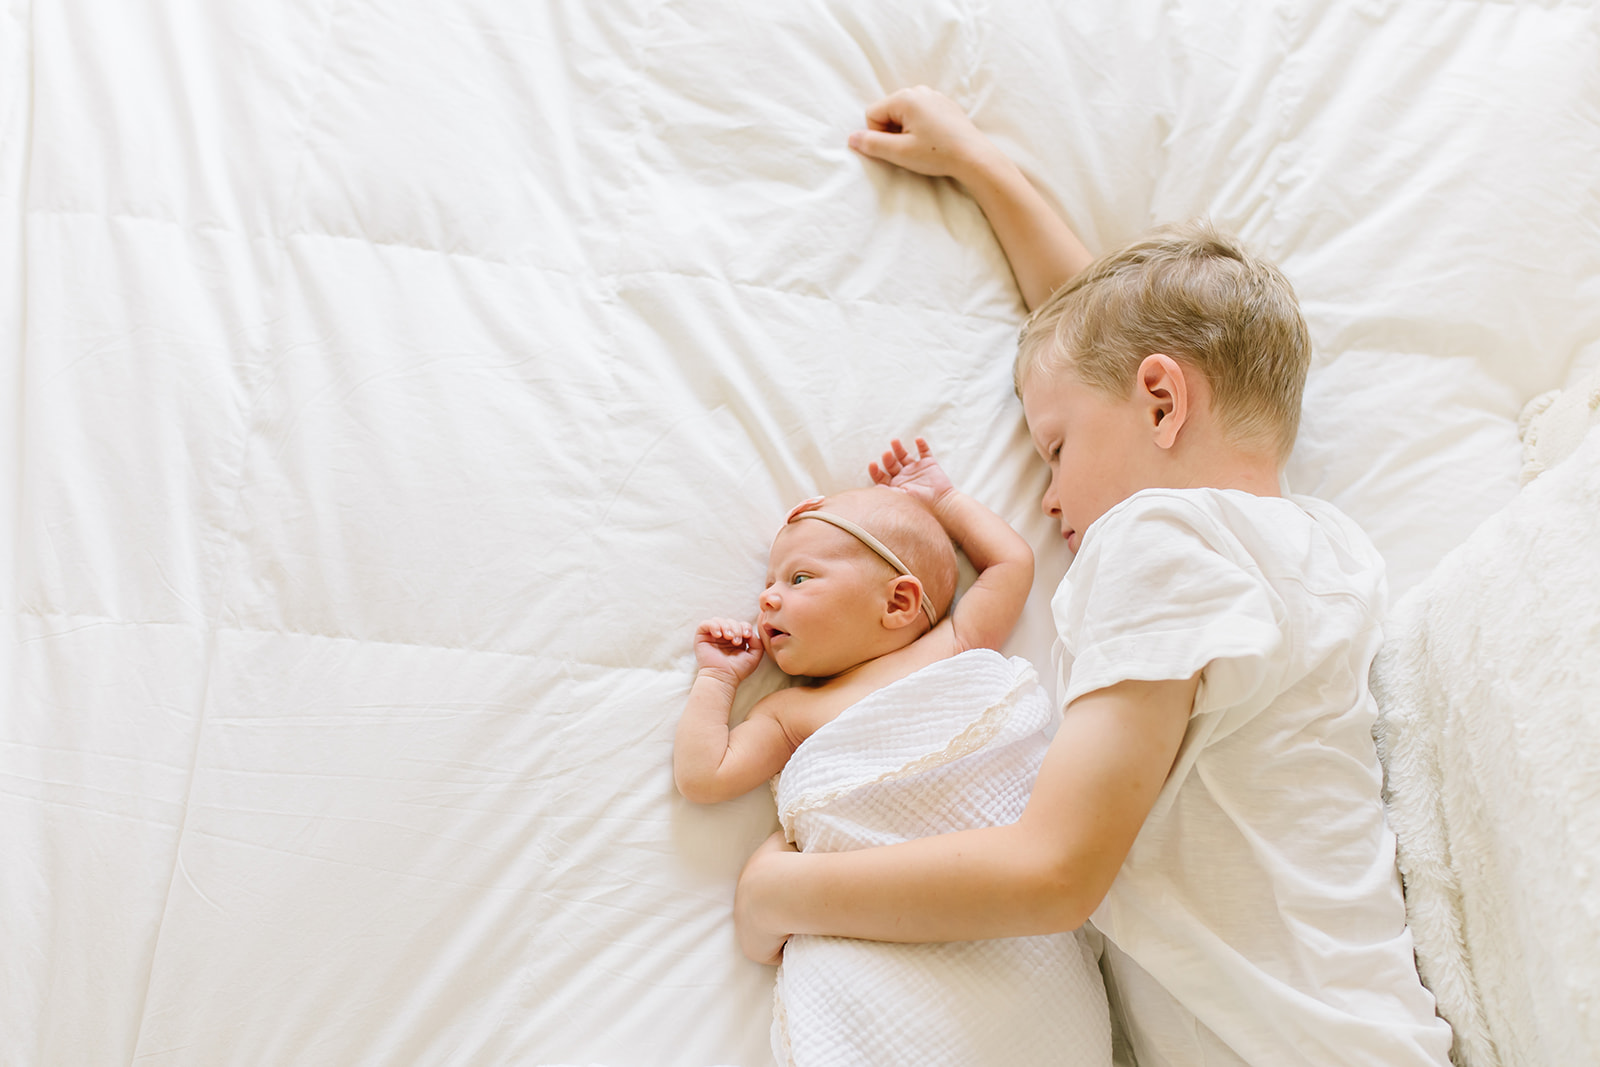 Young boy lays and cuddles with his newborn baby sister on a white bed